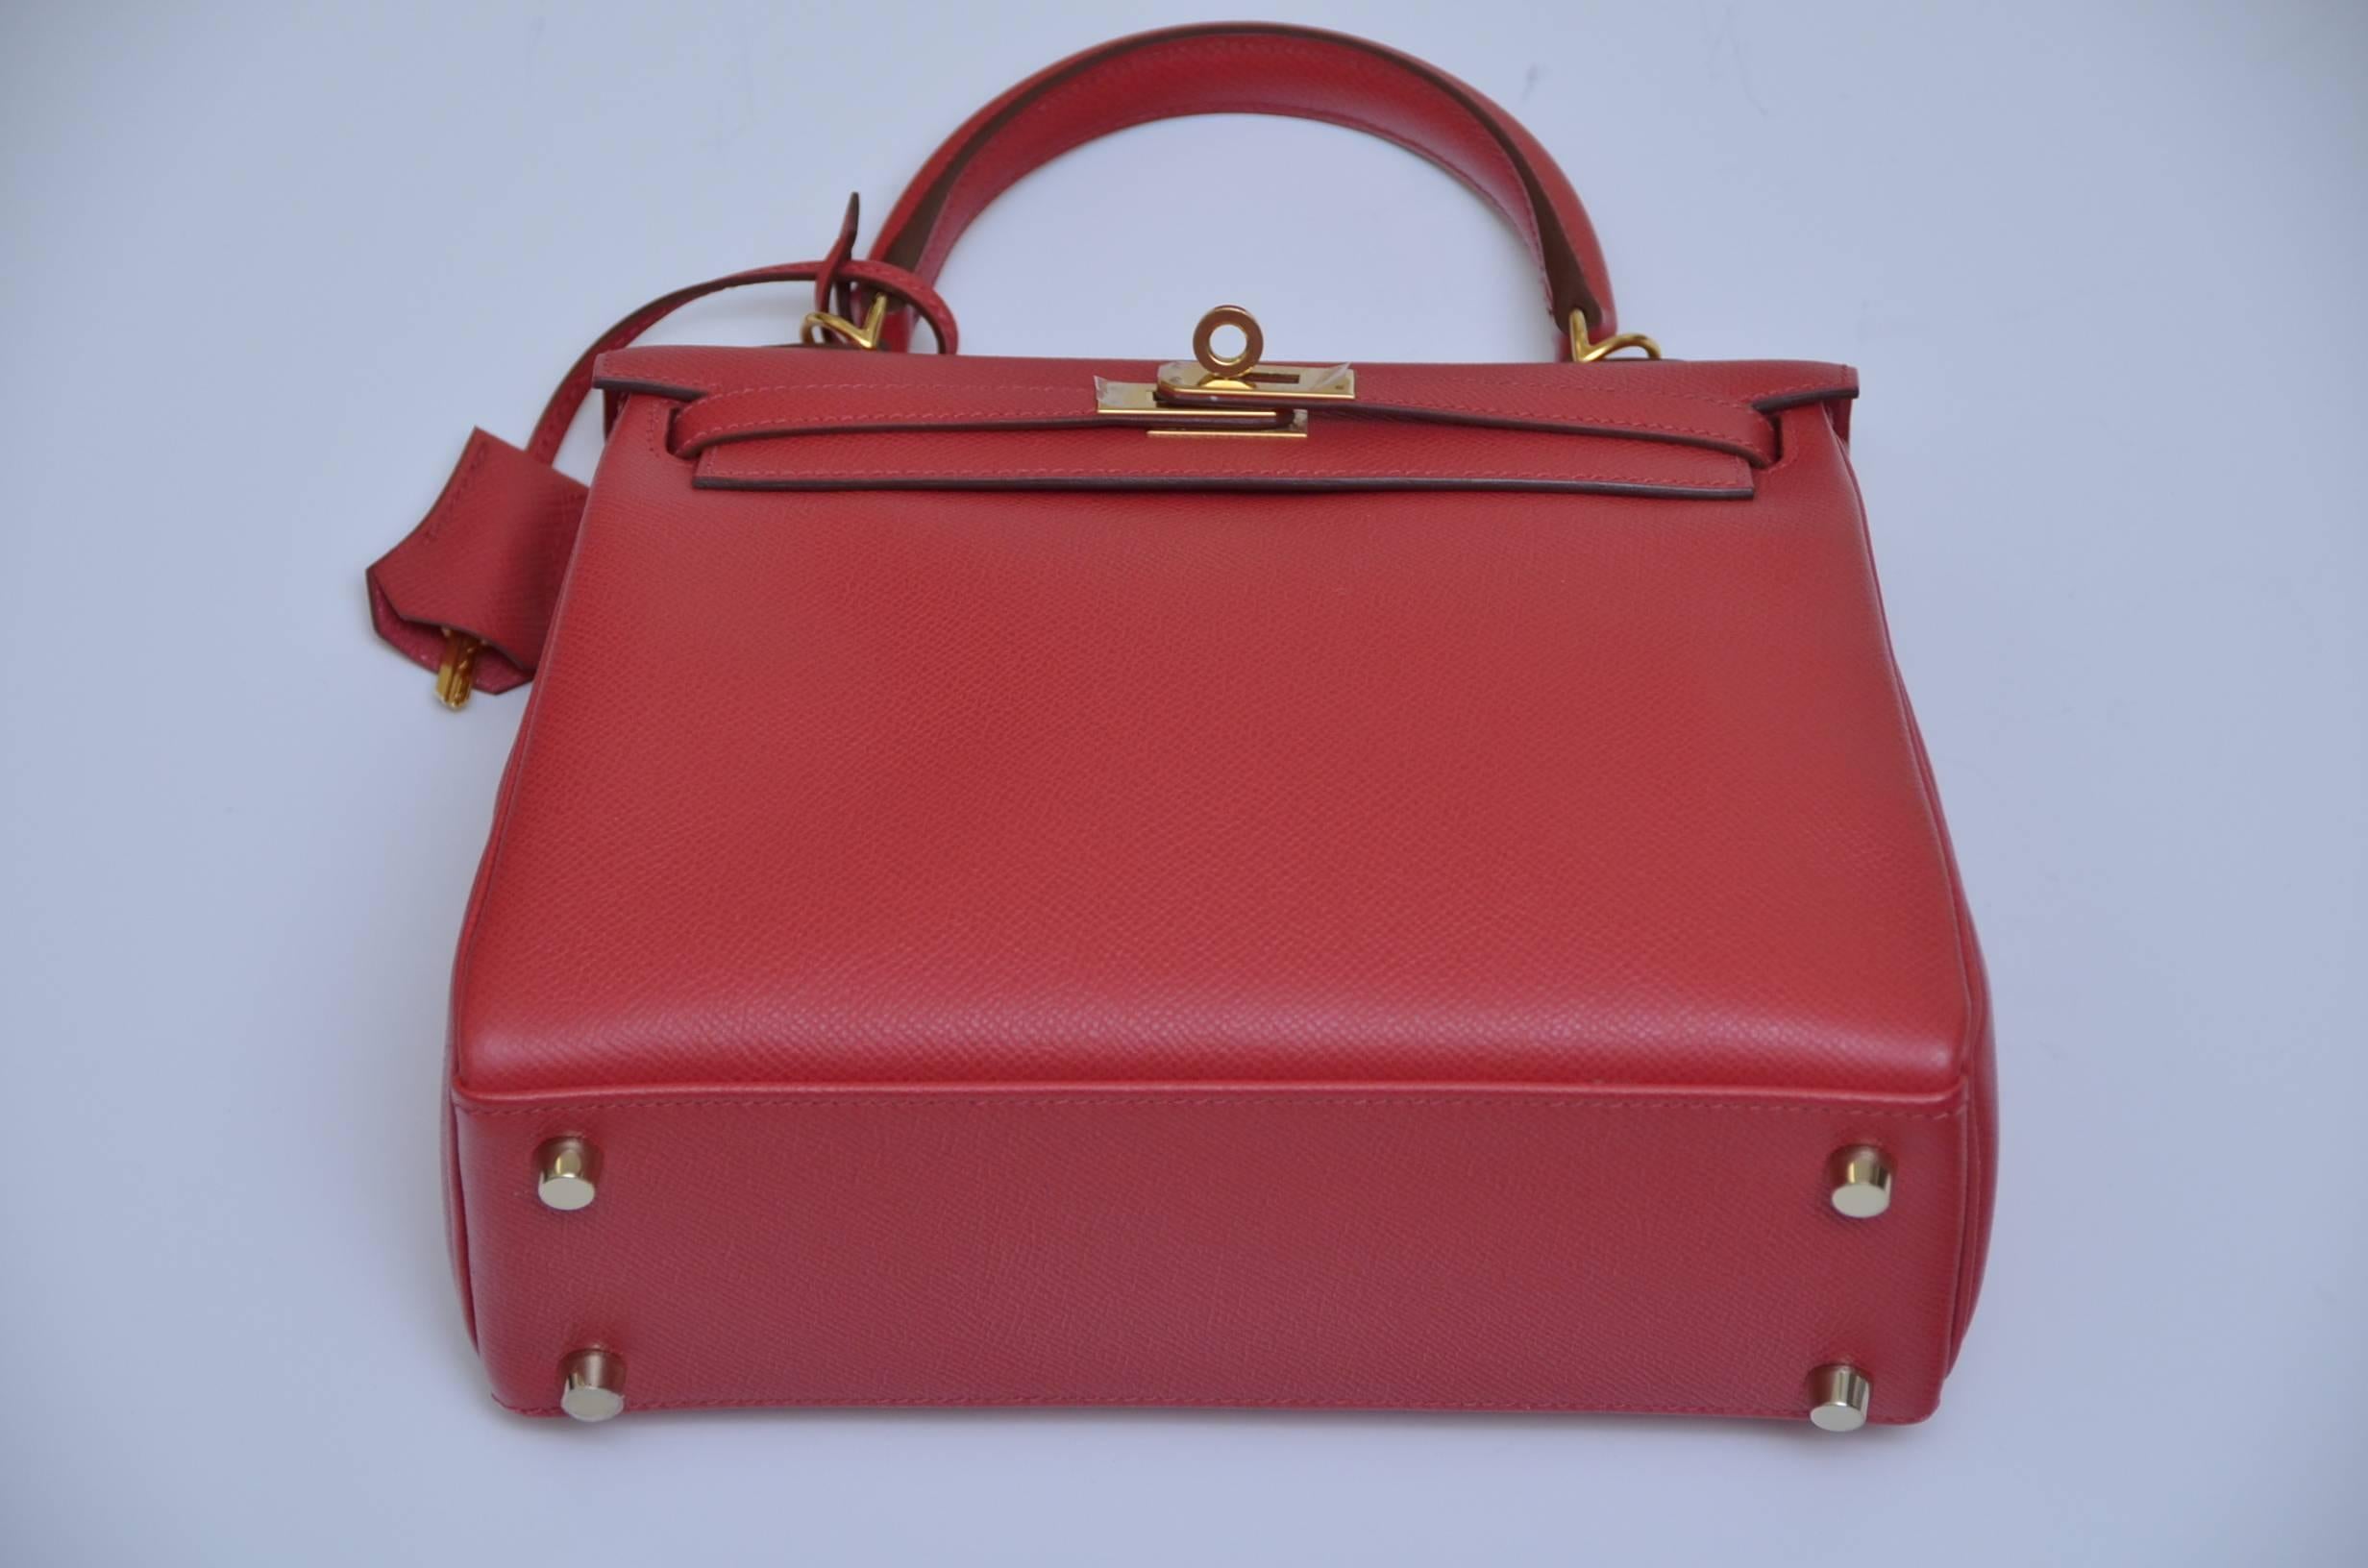 Hermes Kelly Retourne  25 CM with shoulder strap.
Epsom leather .
New with plastic cover on the  the hardware .
Mini kelly with a stiff quality that keeps the bag rigid, Epsom is easy to clean.
Color is rouge.
Color in person might be slightly